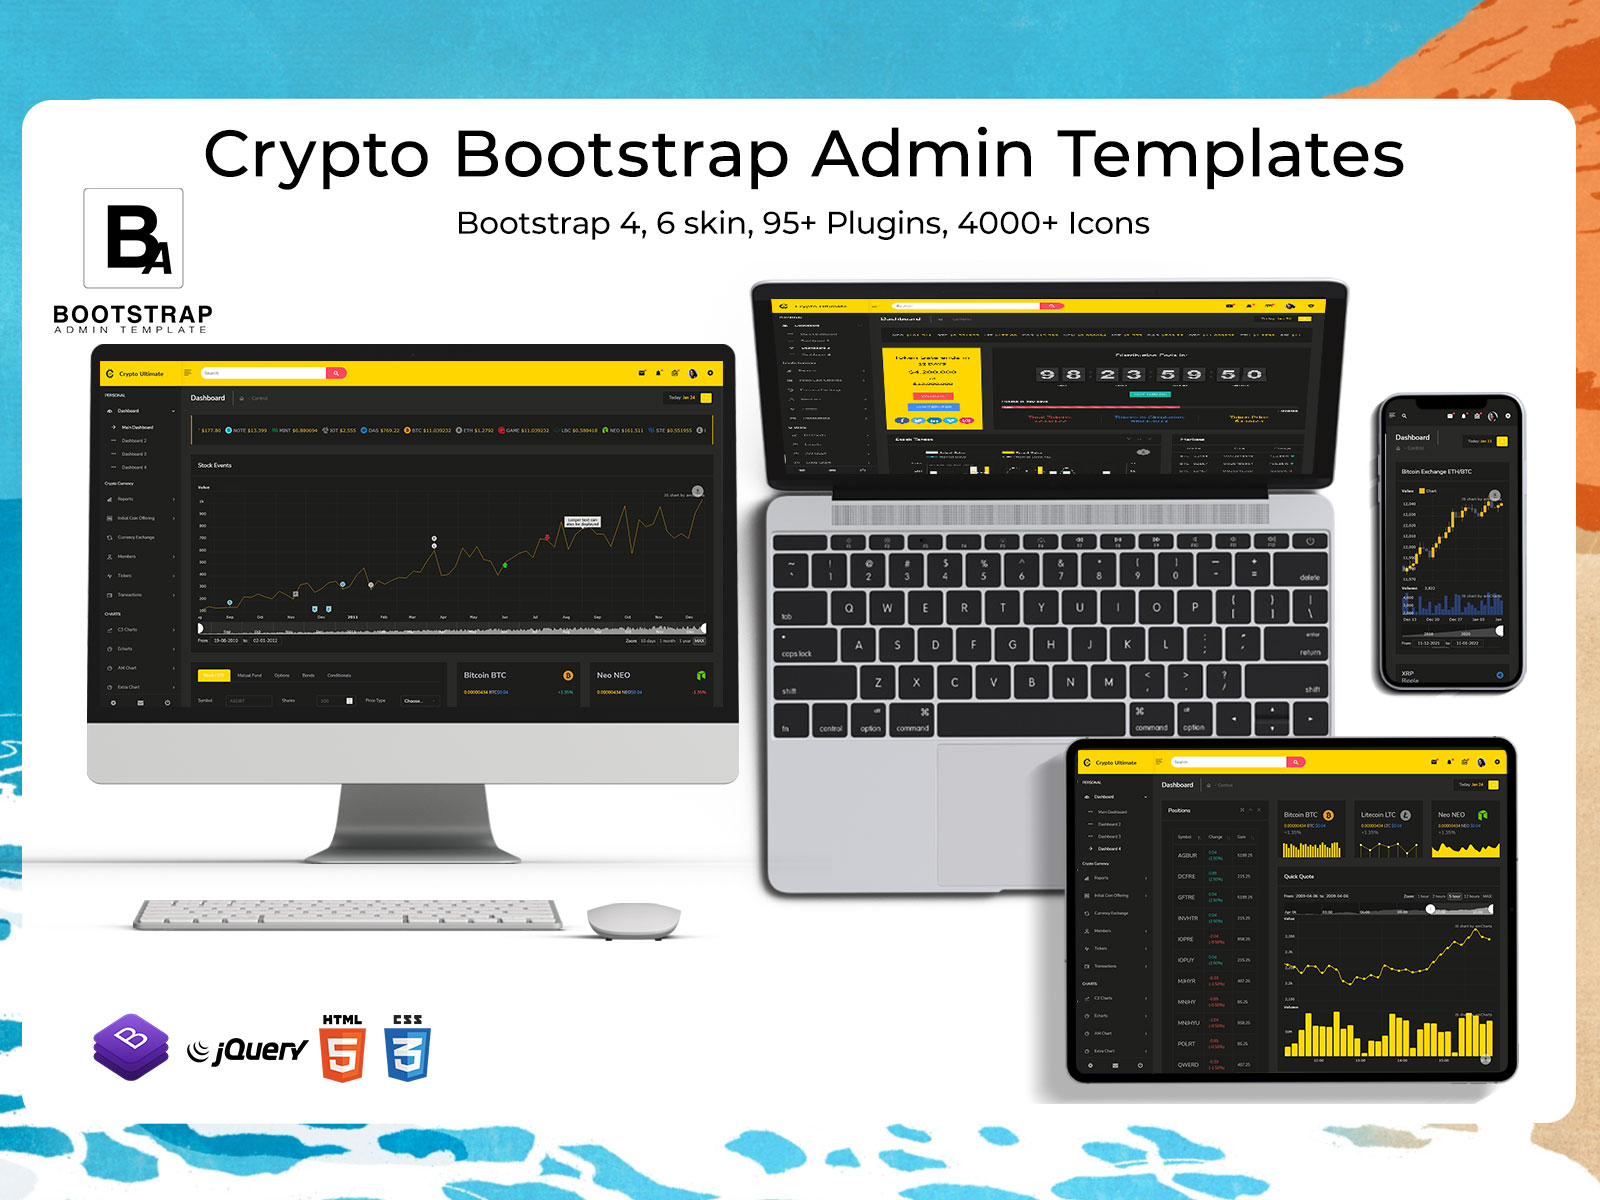 Cryptocurrency Dashboard Admin Template: Securing Your Investments App